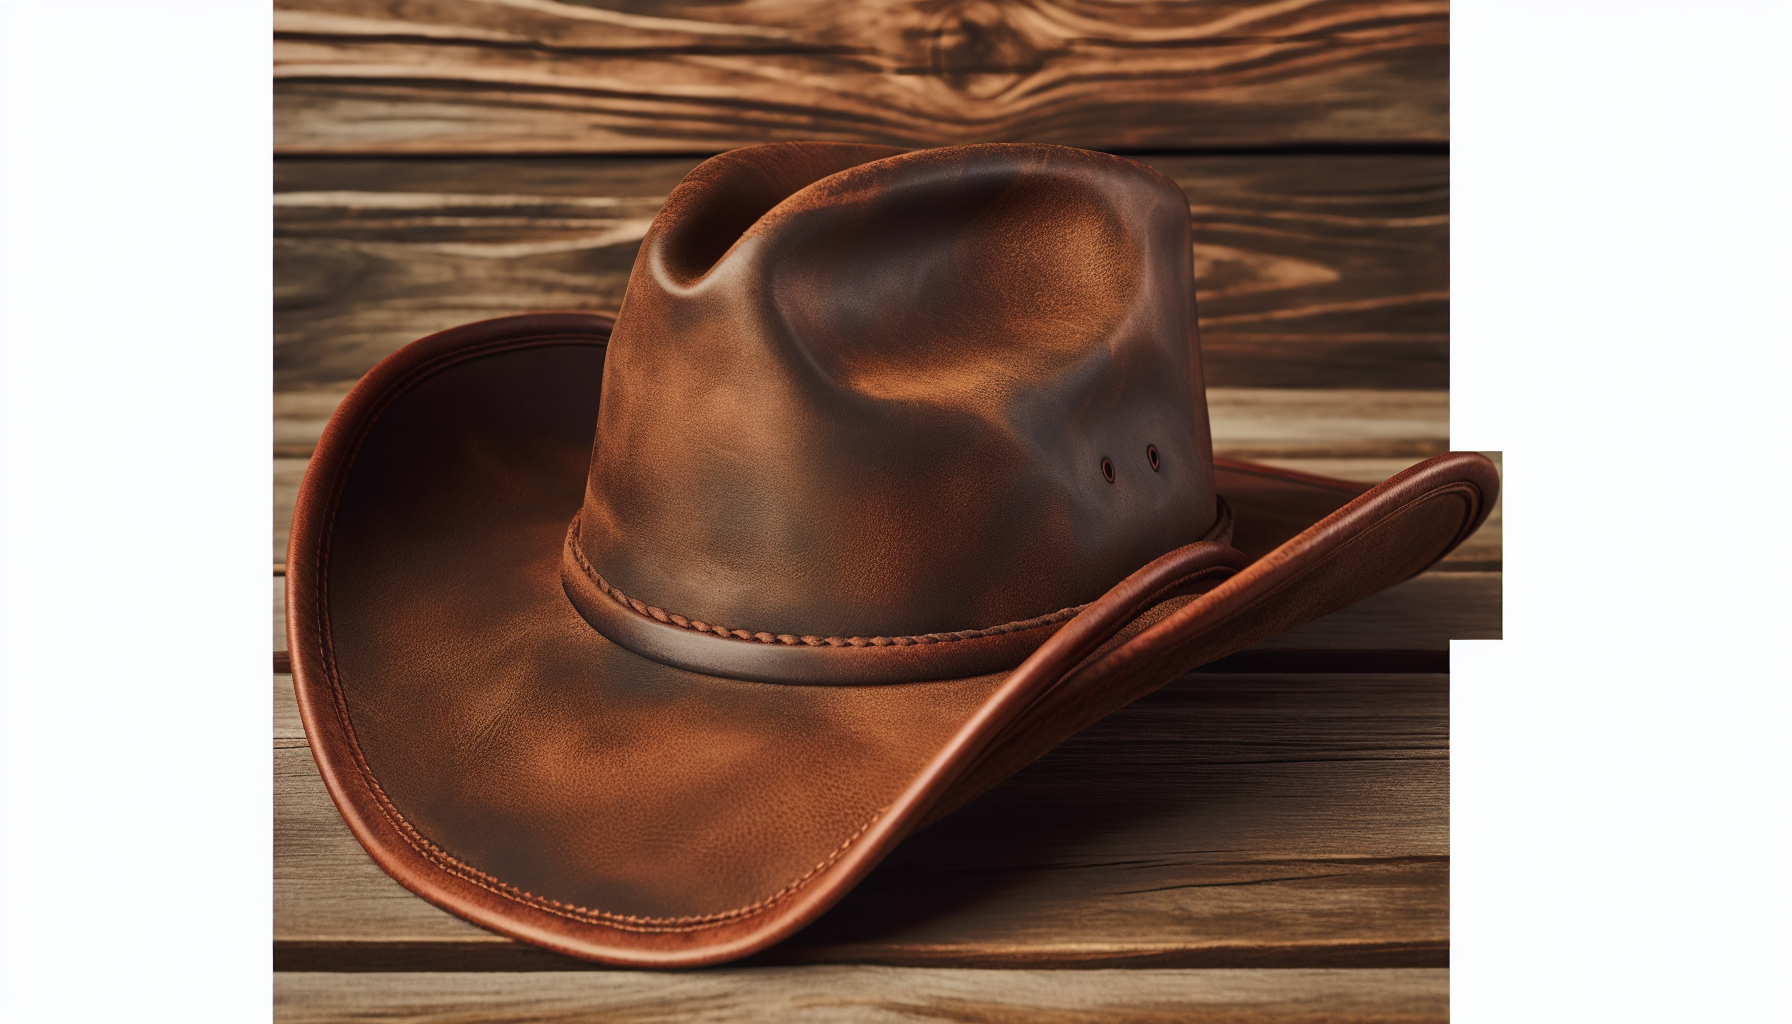 Classic cowboy hat with cattleman crease